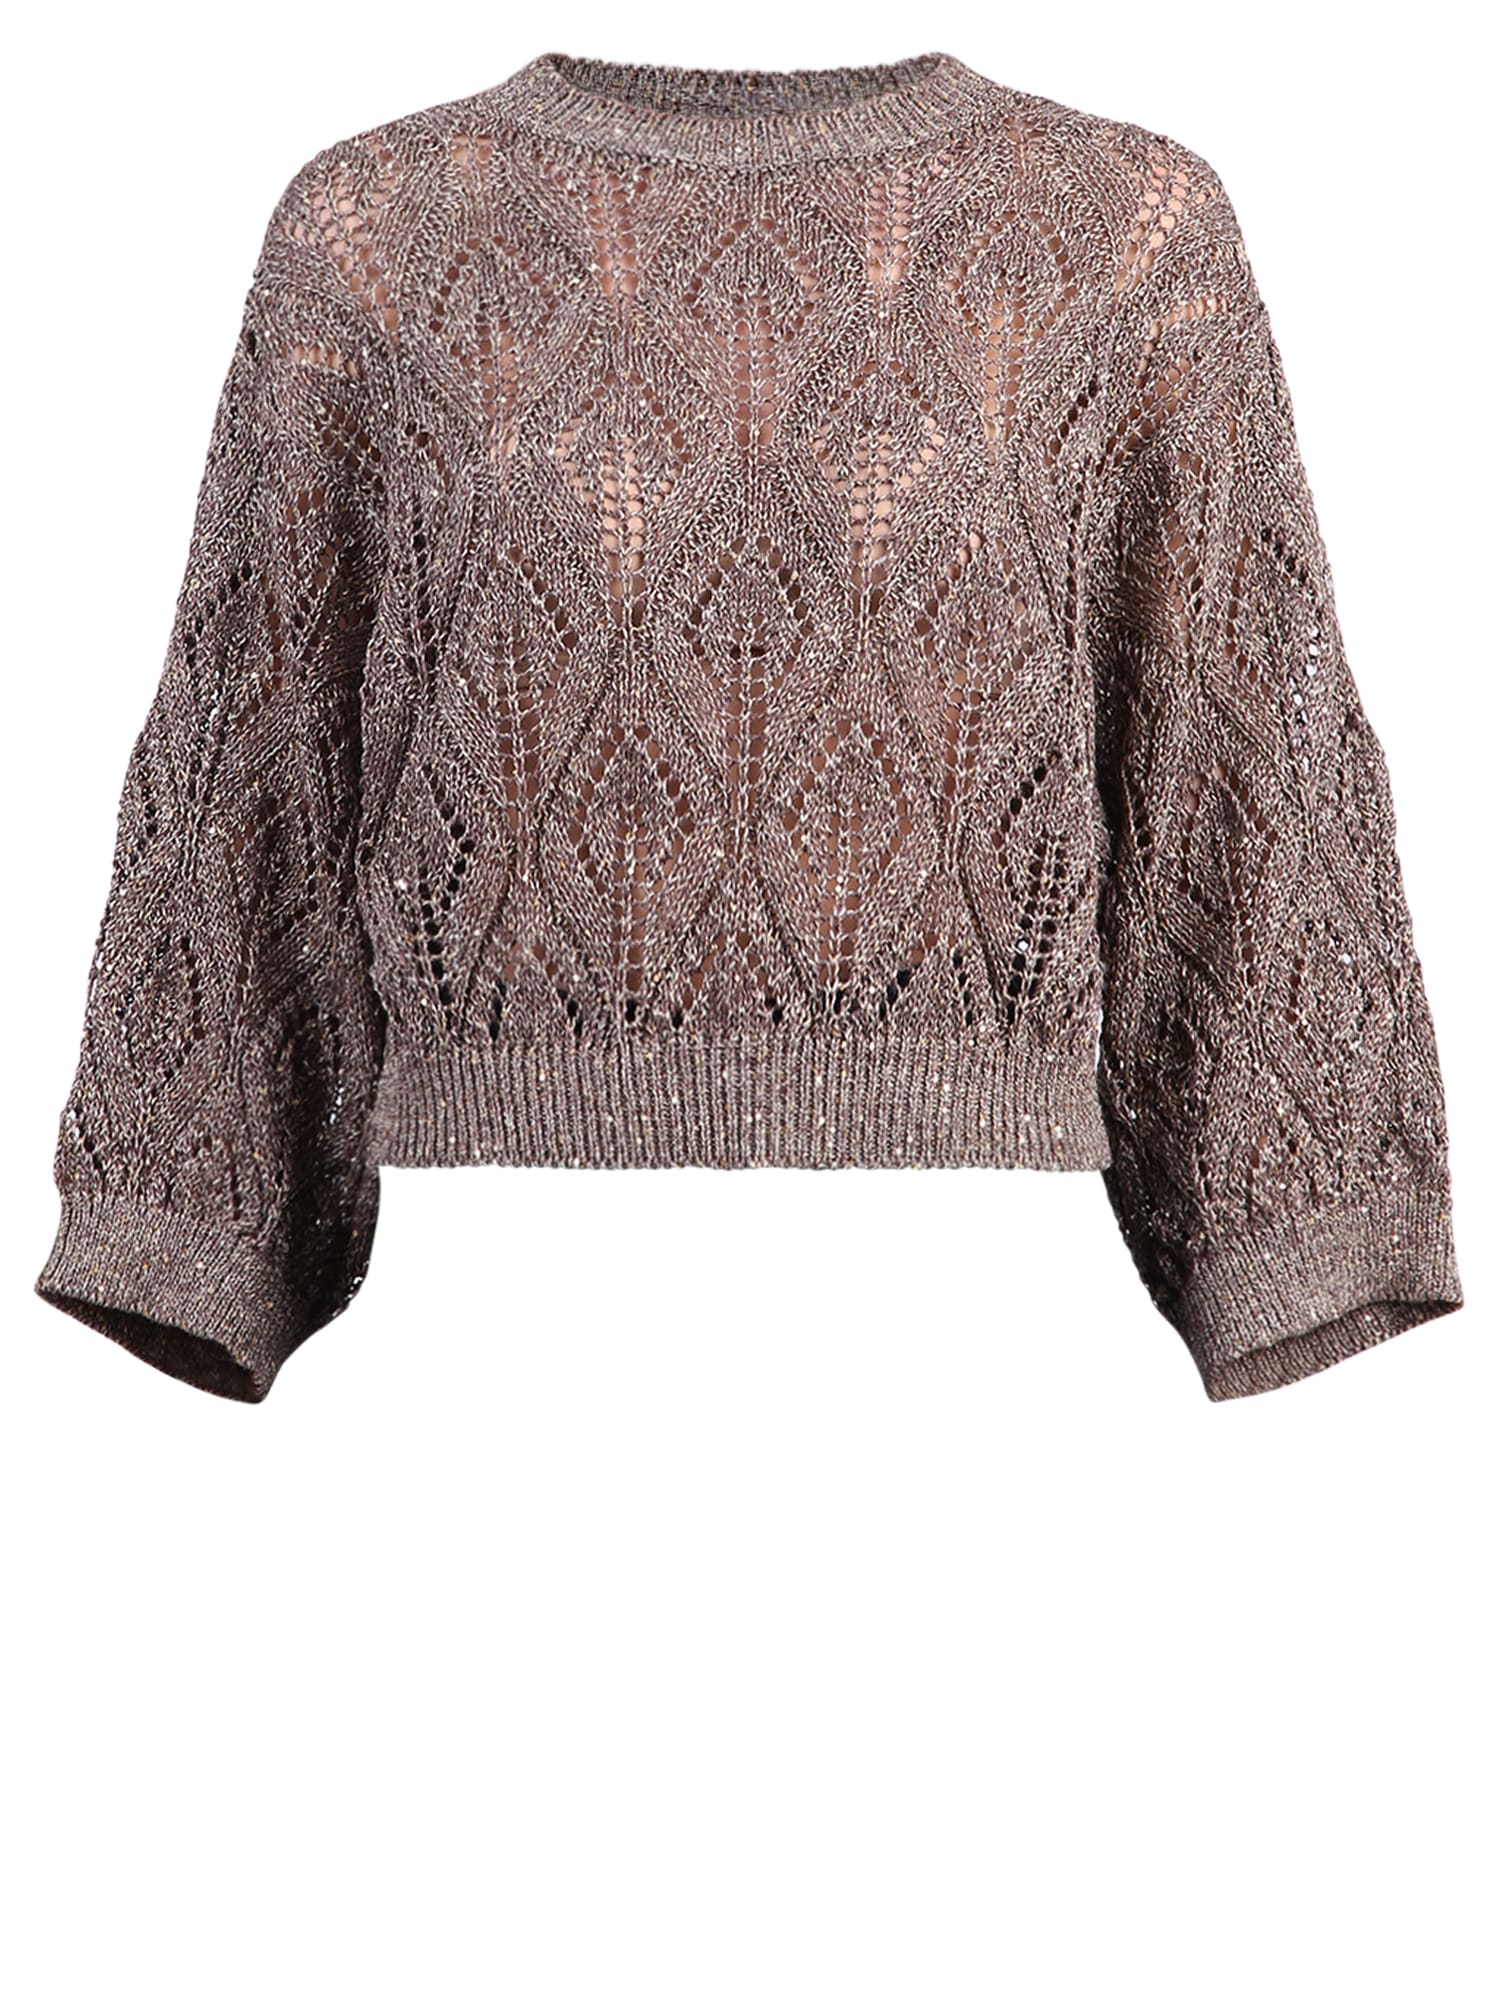 Brunello Cucinelli Relaxed Fit Sweater In Brown